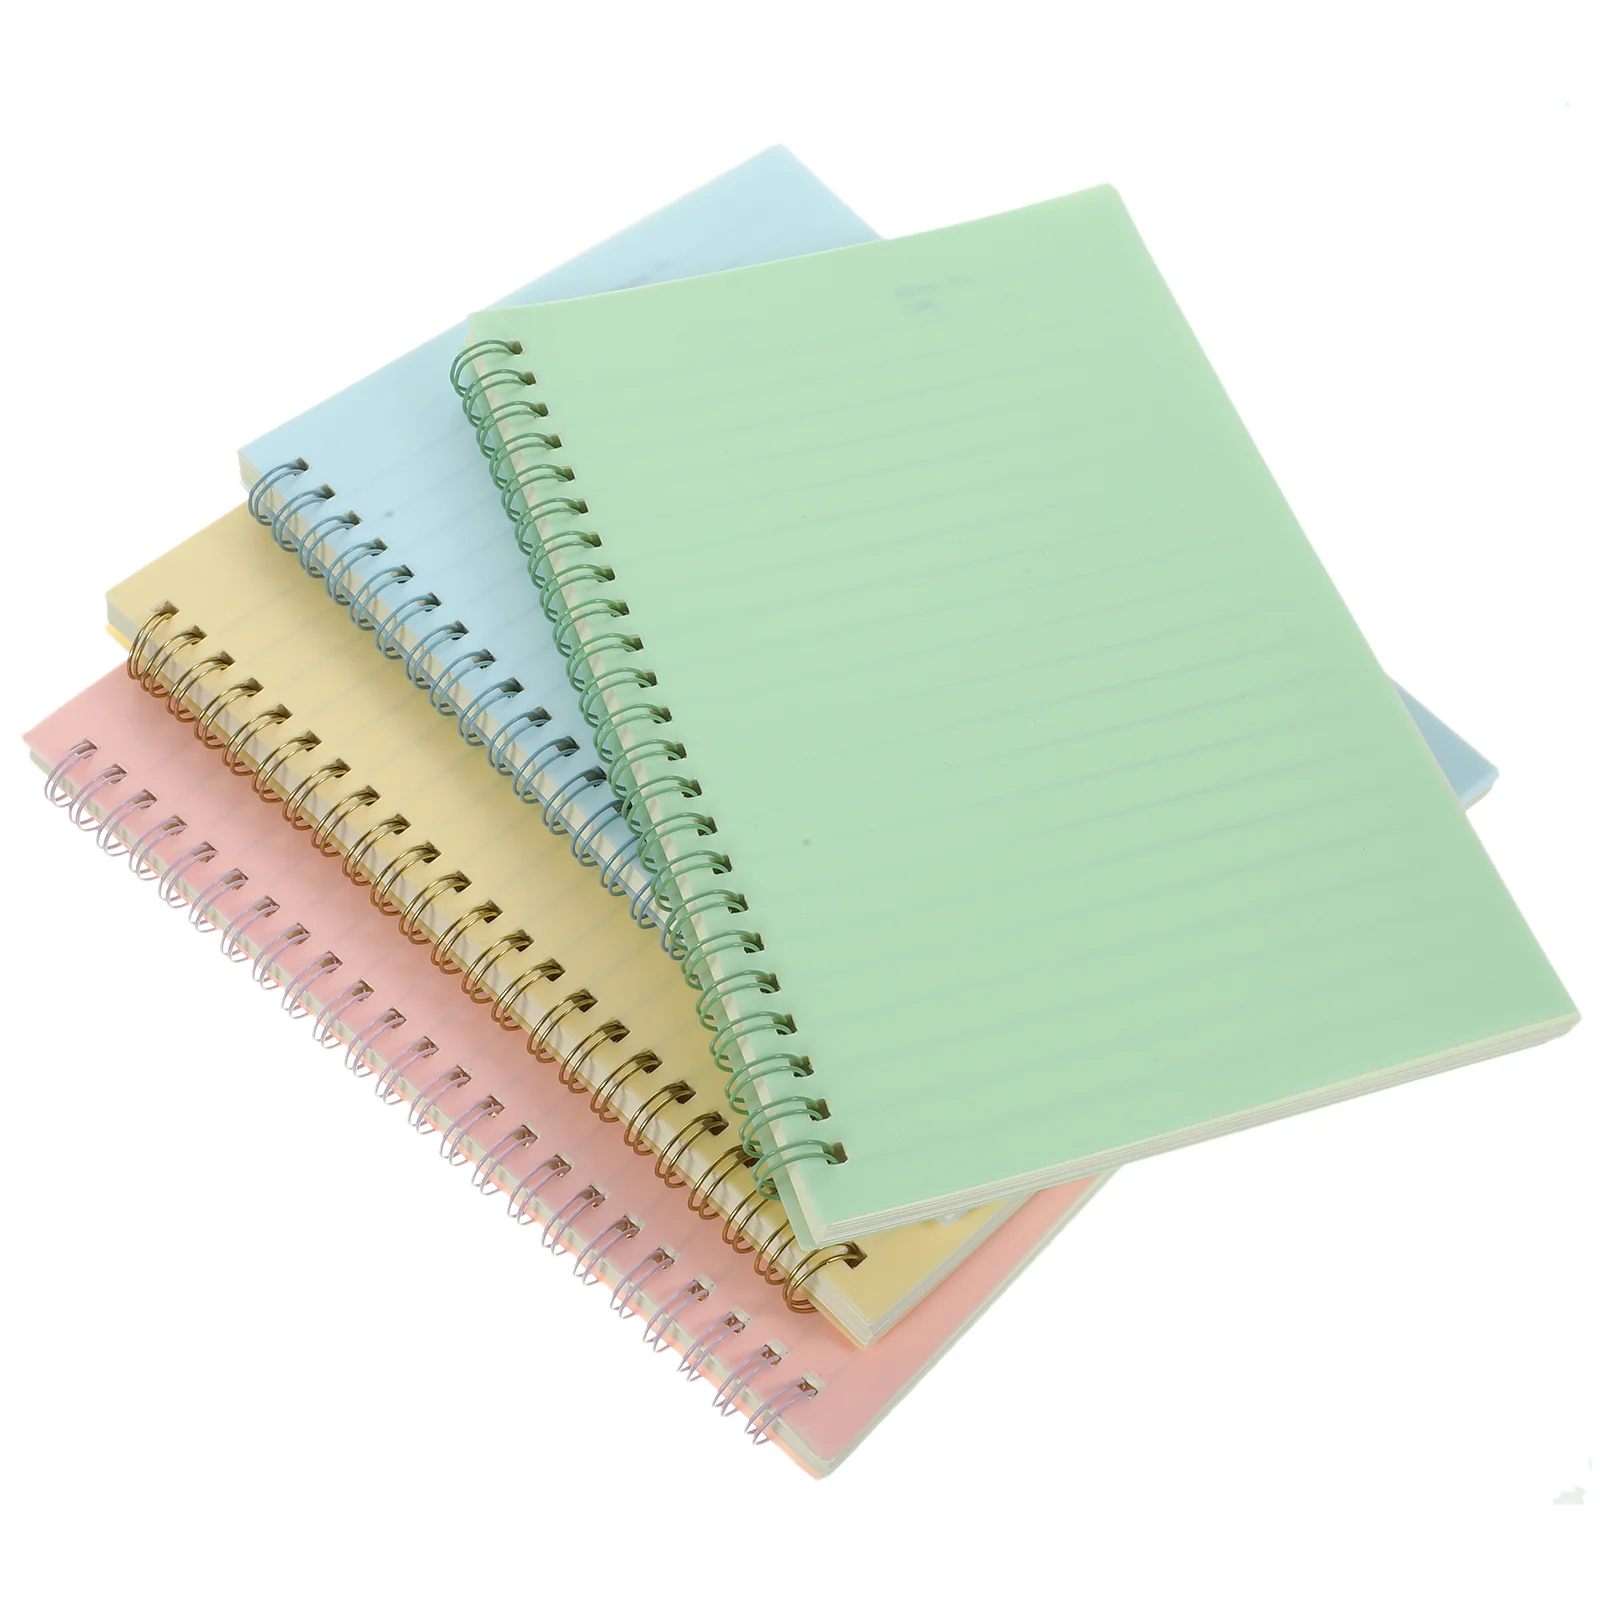 

4 Pcs A5 Coil Book Work Notebook Office Spiral Notes for Taking Kawaii Paper Small Work School